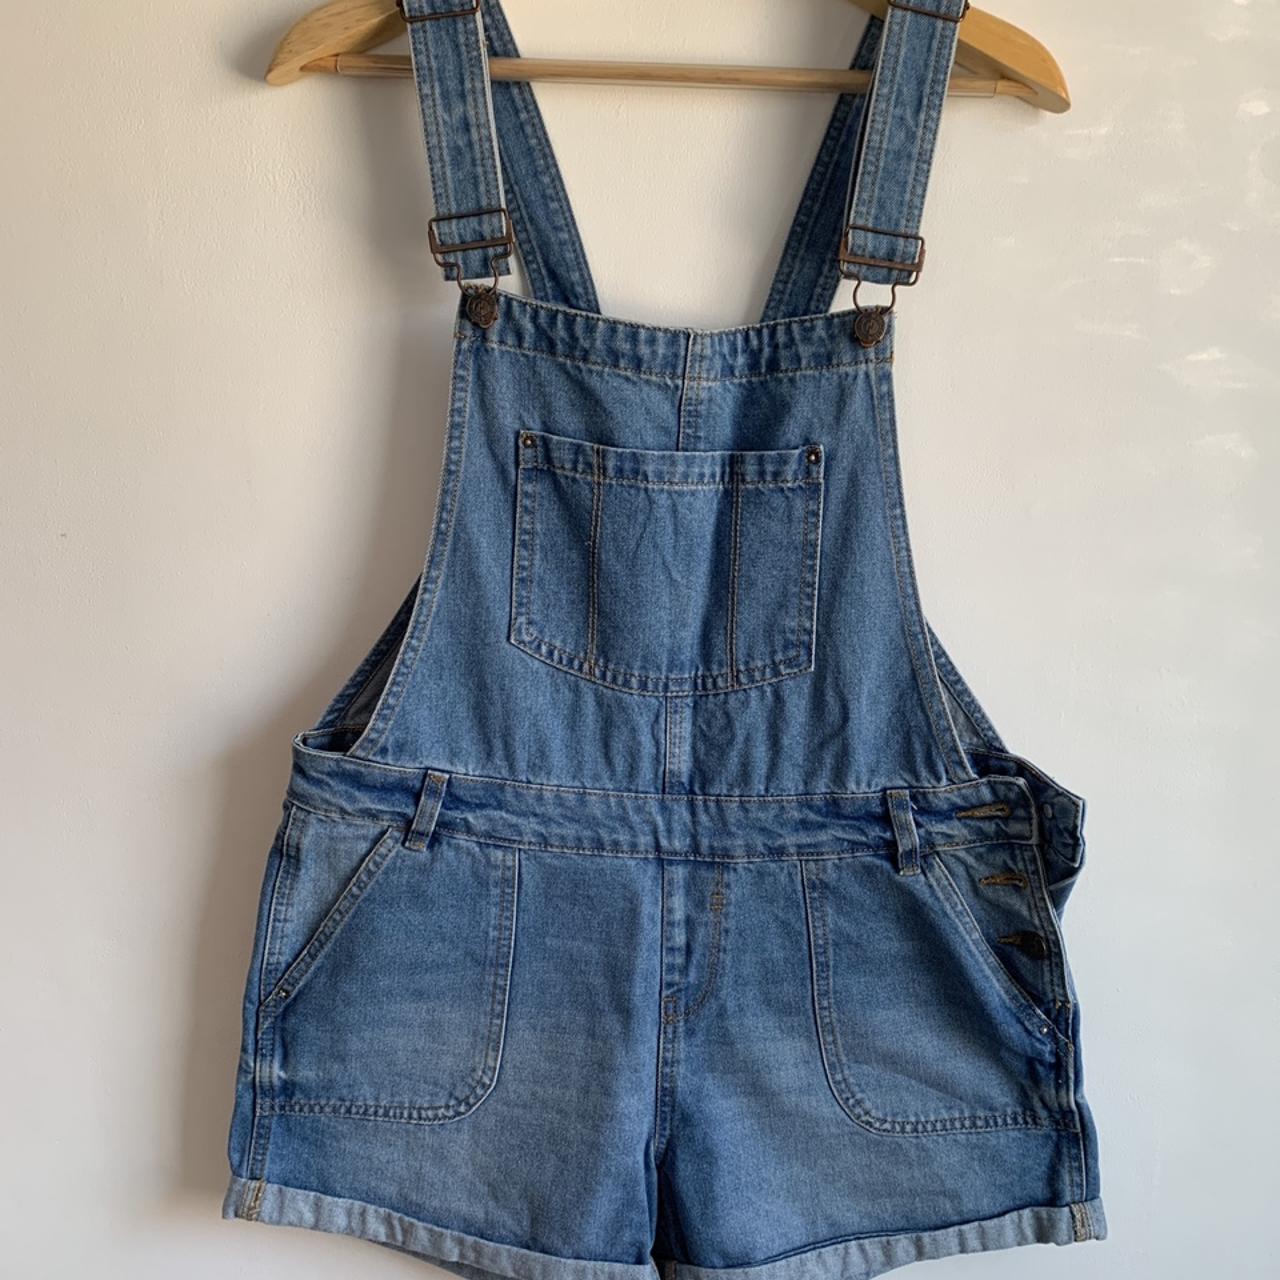 New look 915 dungarees age 15 to fit a size 10/12 - Depop